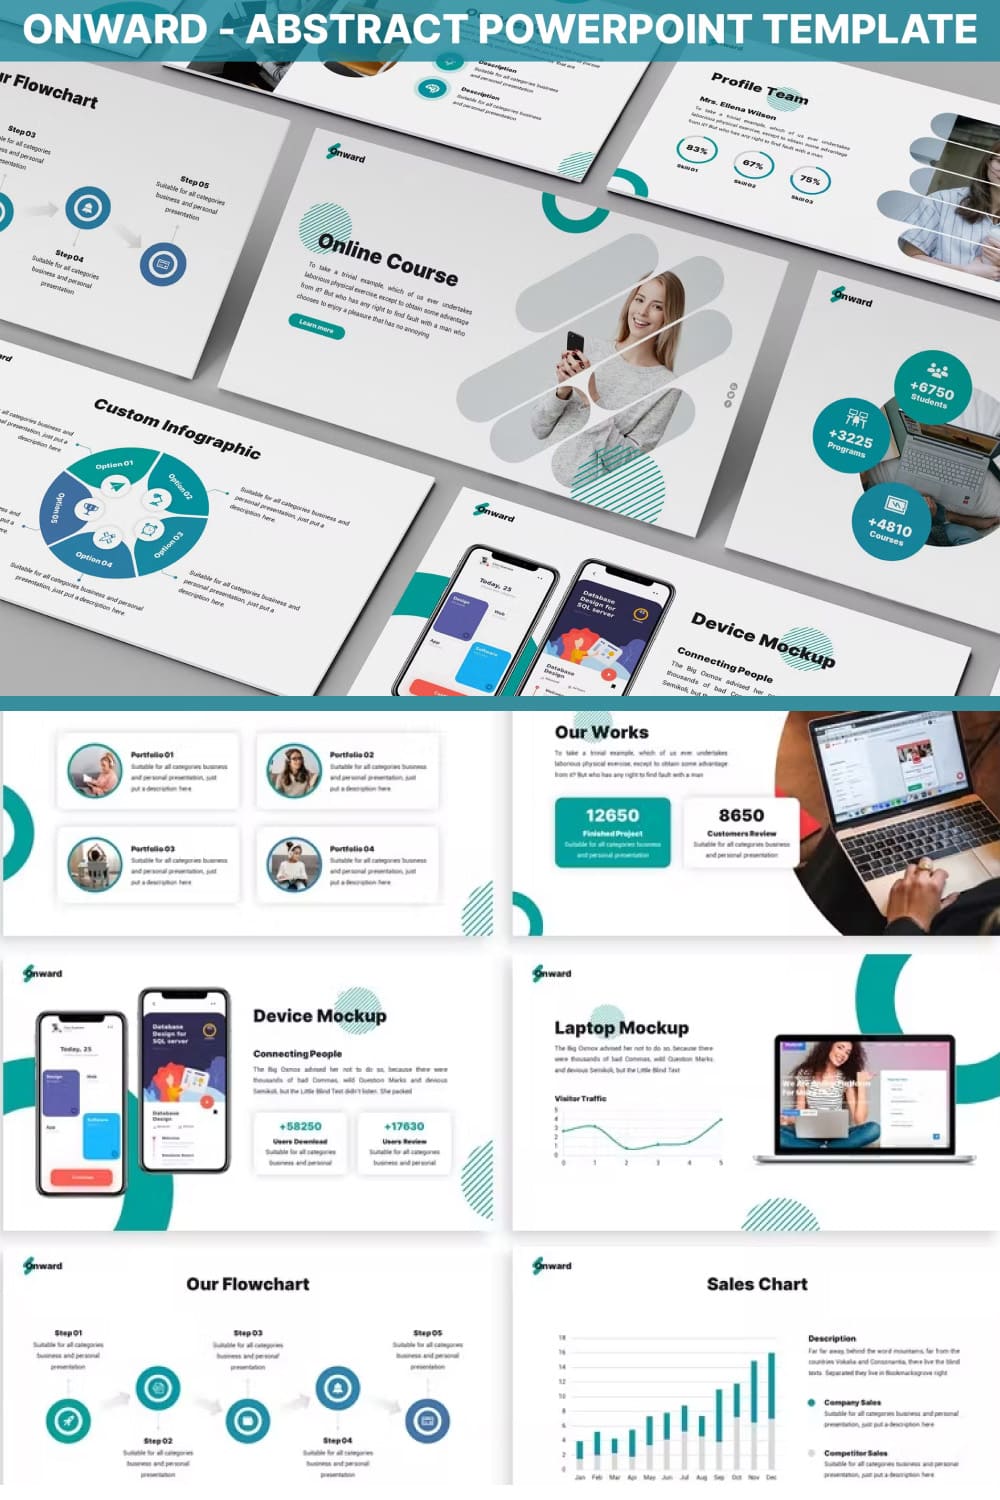 Onward abstract powerpoint template - pinterest image preview.